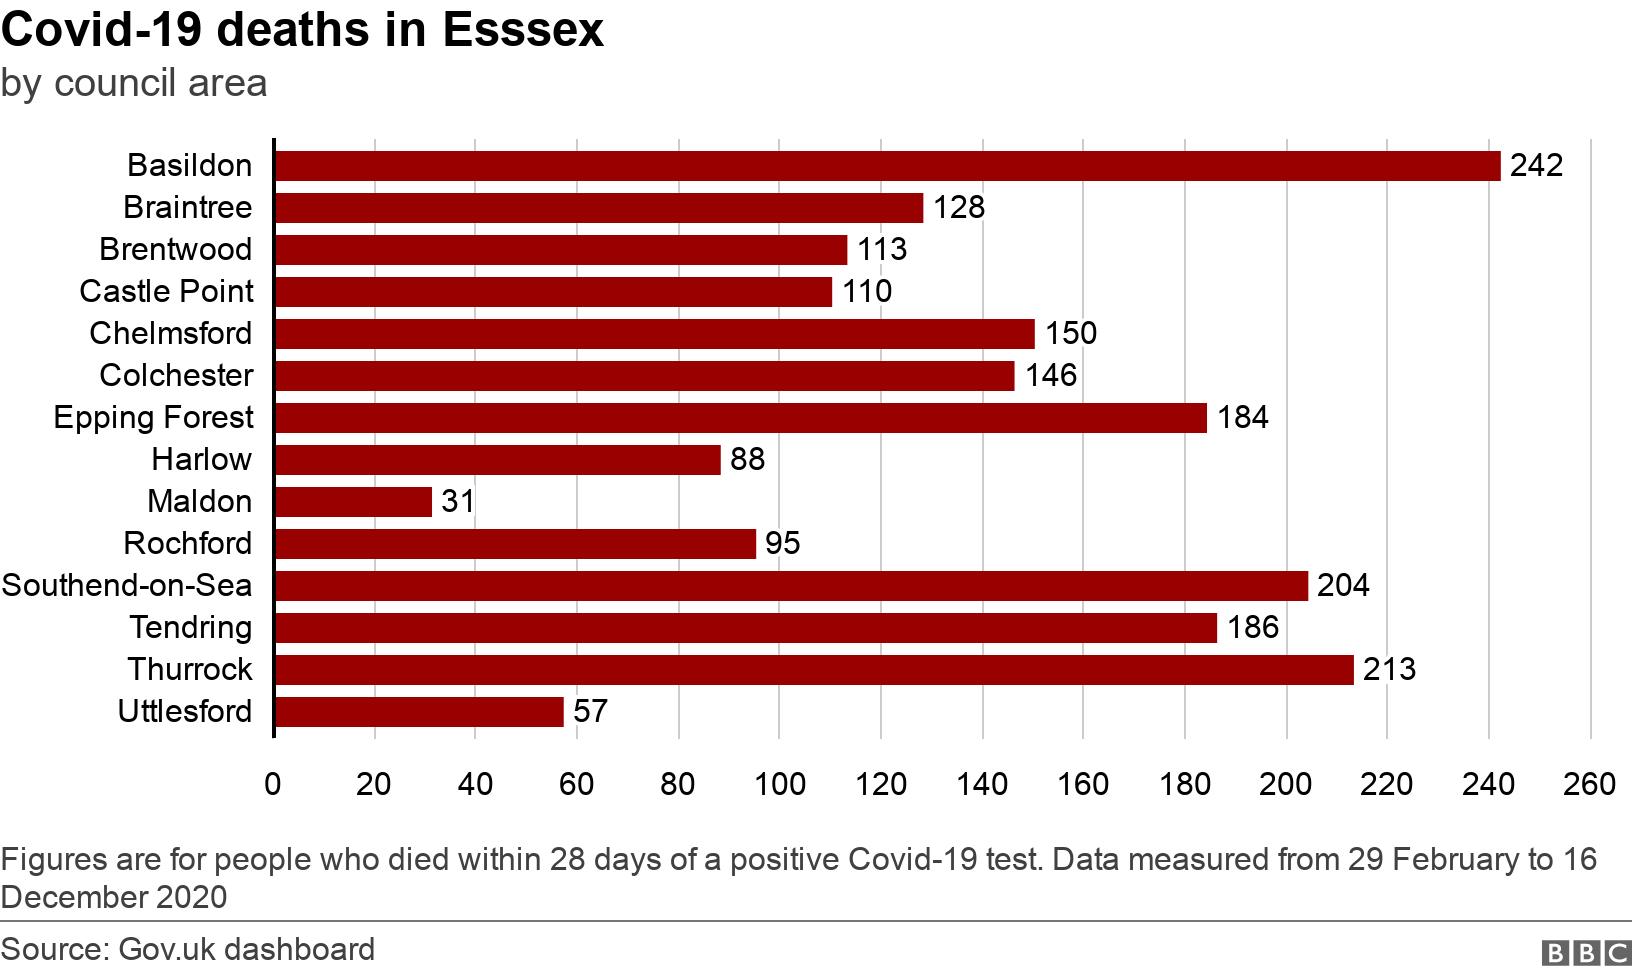 Covid-19 deaths in Esssex. by council area. Figures are for people who died within 28 days of a positive Covid-19 test. Data measured from 29 February to 16 December 2020.